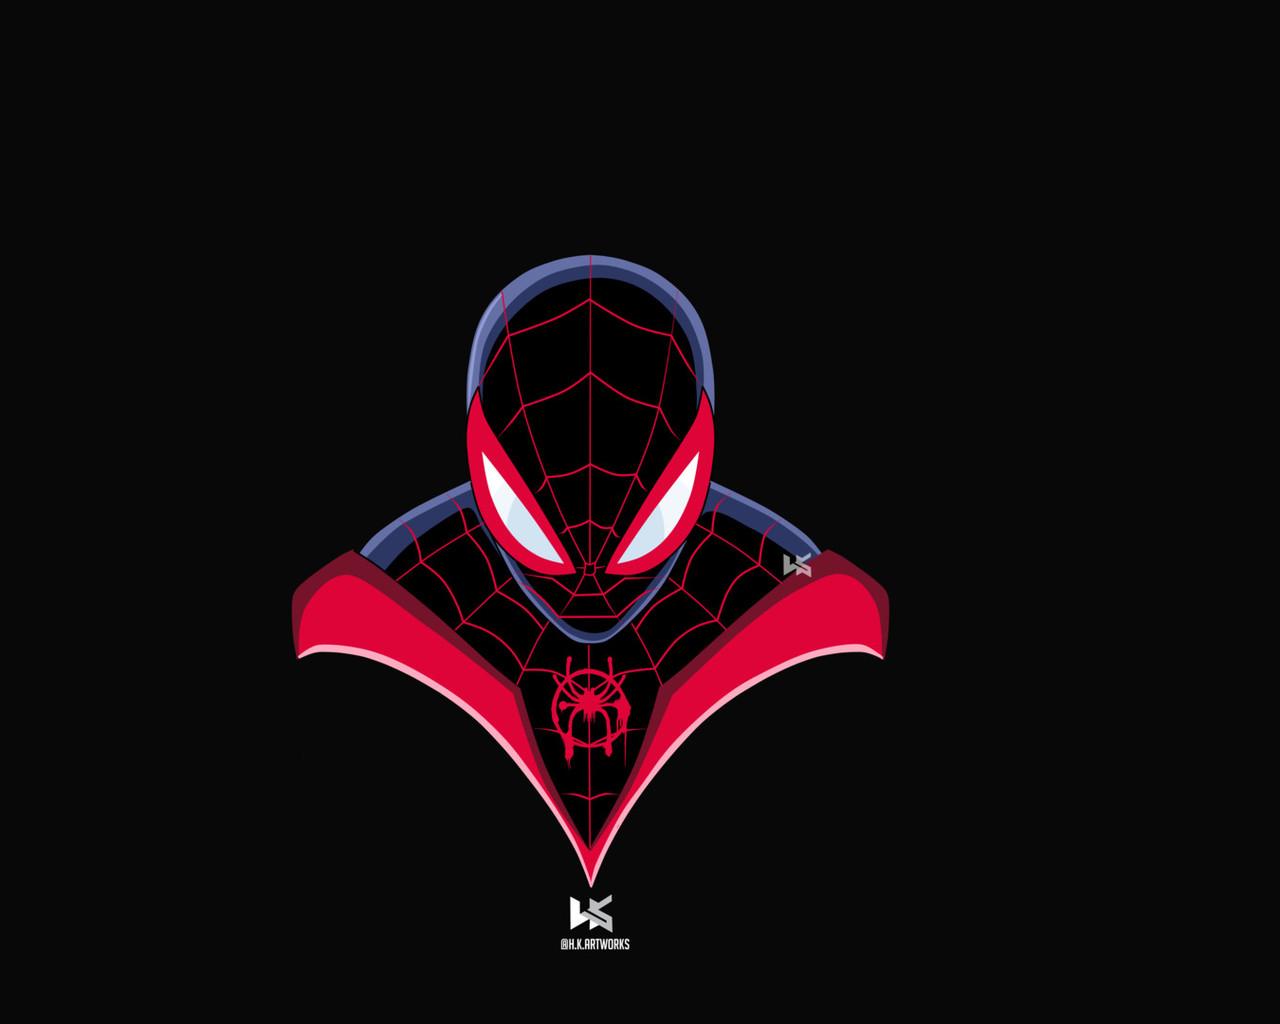 How To Draw Miles Morales Spider-Man | Step By Step Tutorial - YouTube